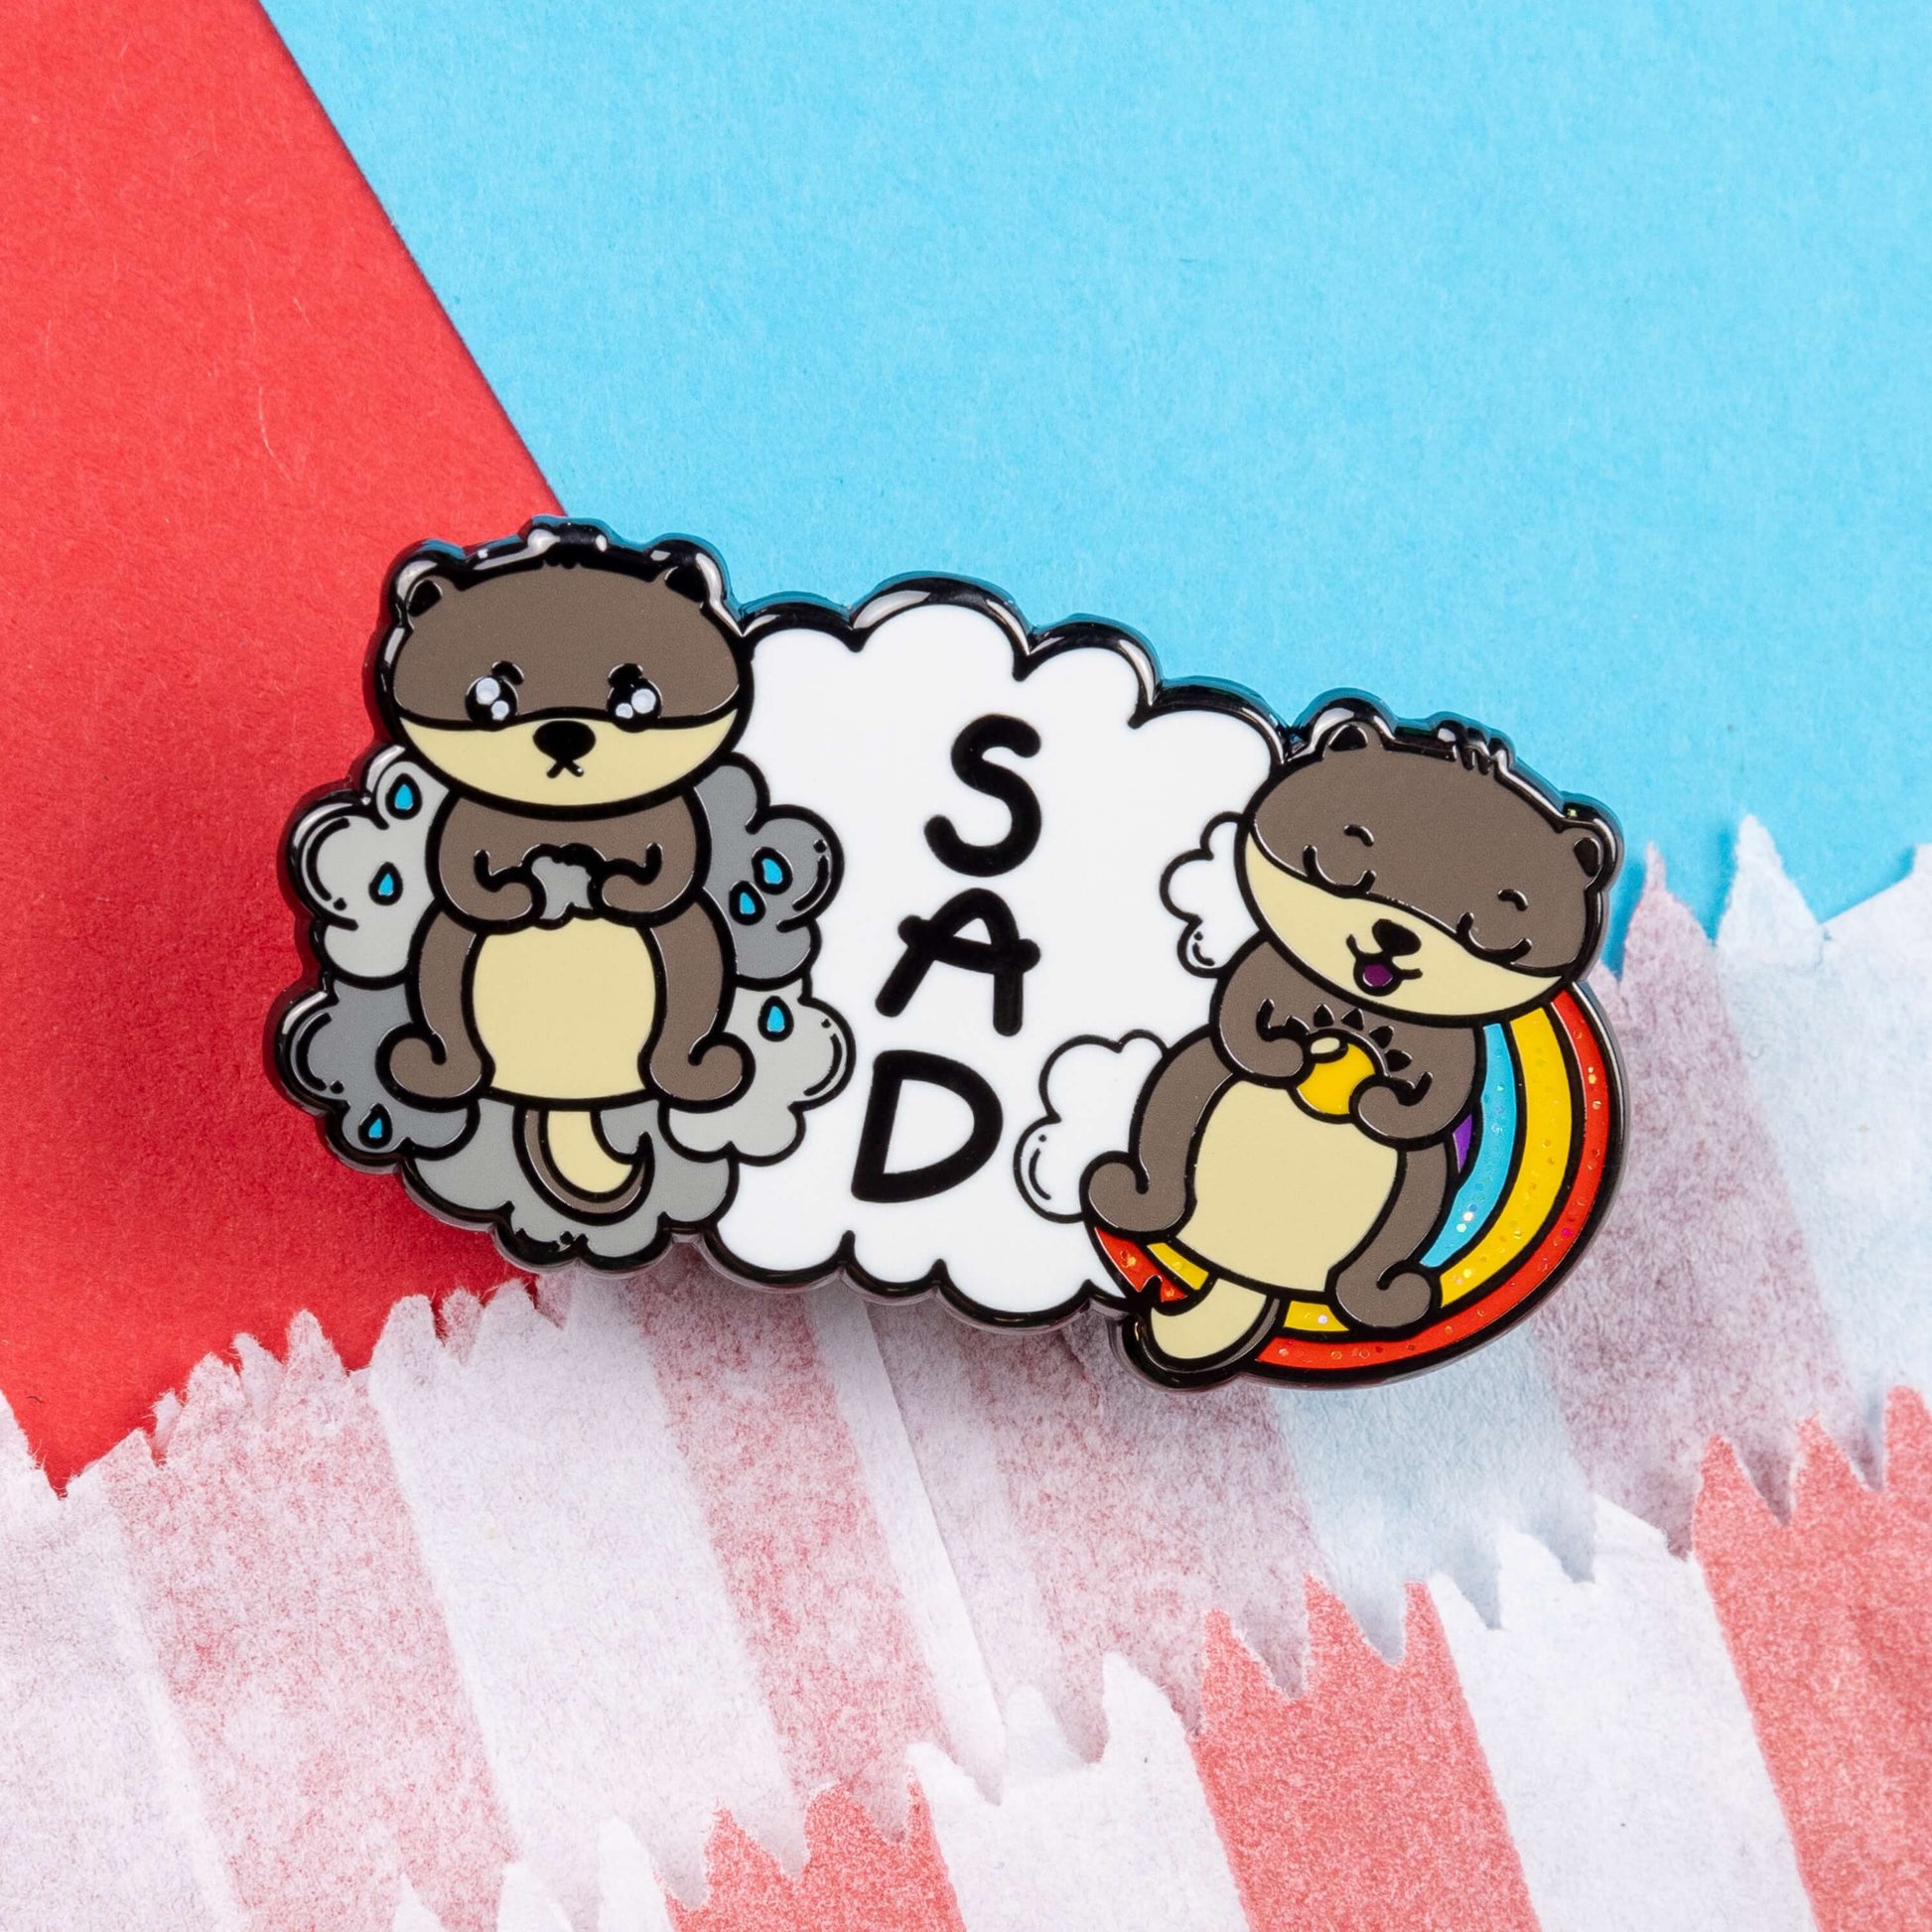 The Seasonal Affective Otter Enamel Pin - Seasonal Affective Disorder SAD on a red and blue card background. The cloud shaped pin has two otters on either side, one sad on a raincloud clutching a raincloud and the other smiling on a rainbow clutching a sunshine. In the middle is the initials 'SAD'. The hand drawn design is raising awareness for Seasonal Affective Disorder.